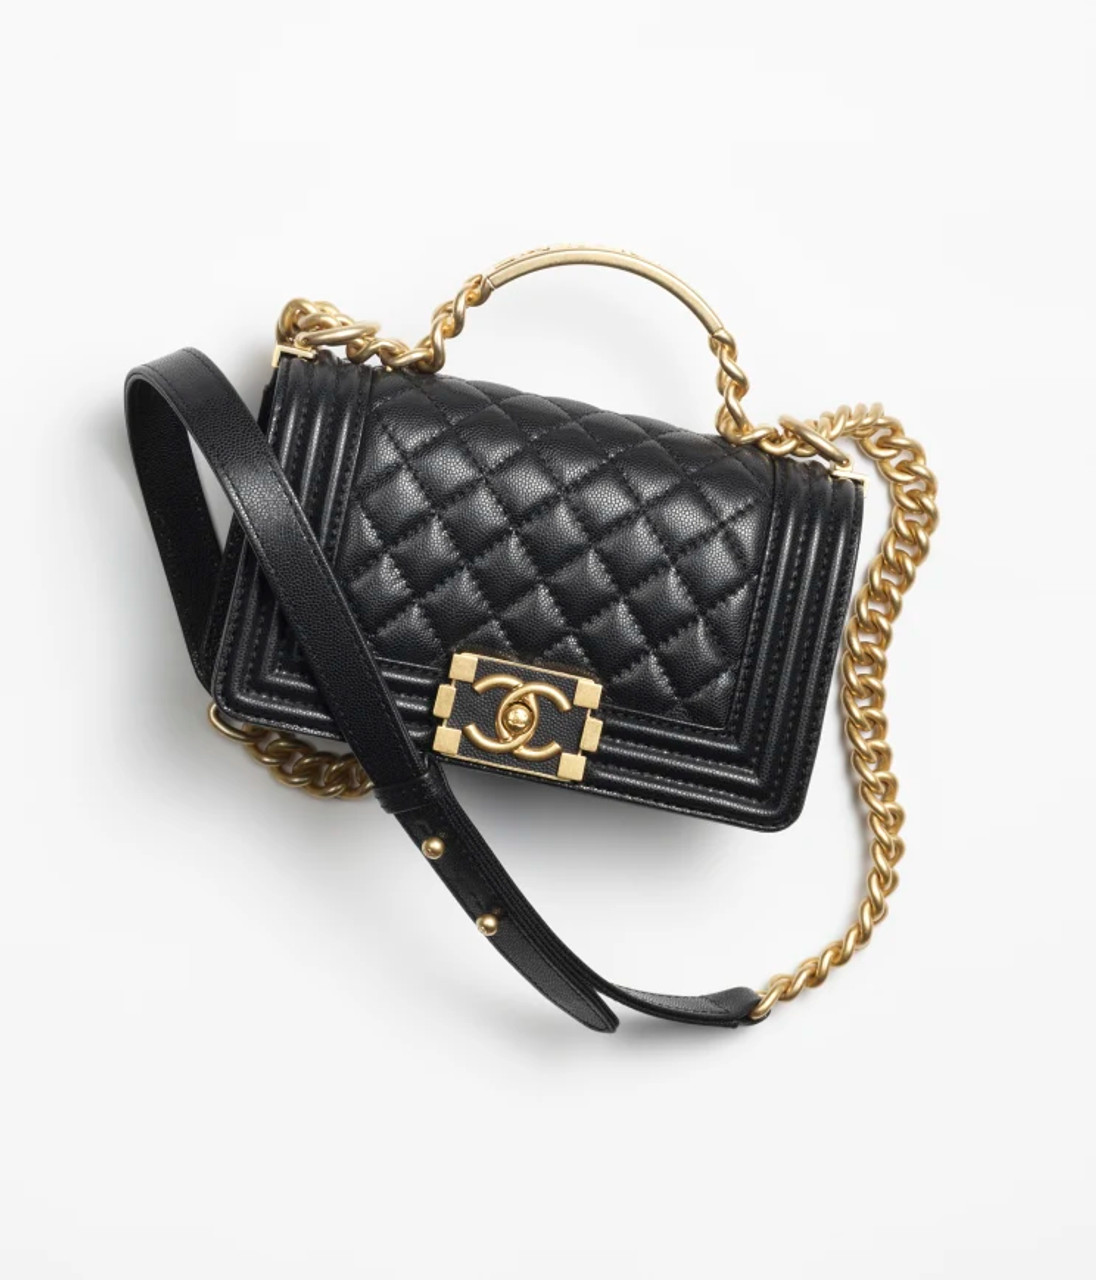 Do Chanel Bags Go On Sale? + Does Chanel have sales? - Fashion For Lunch